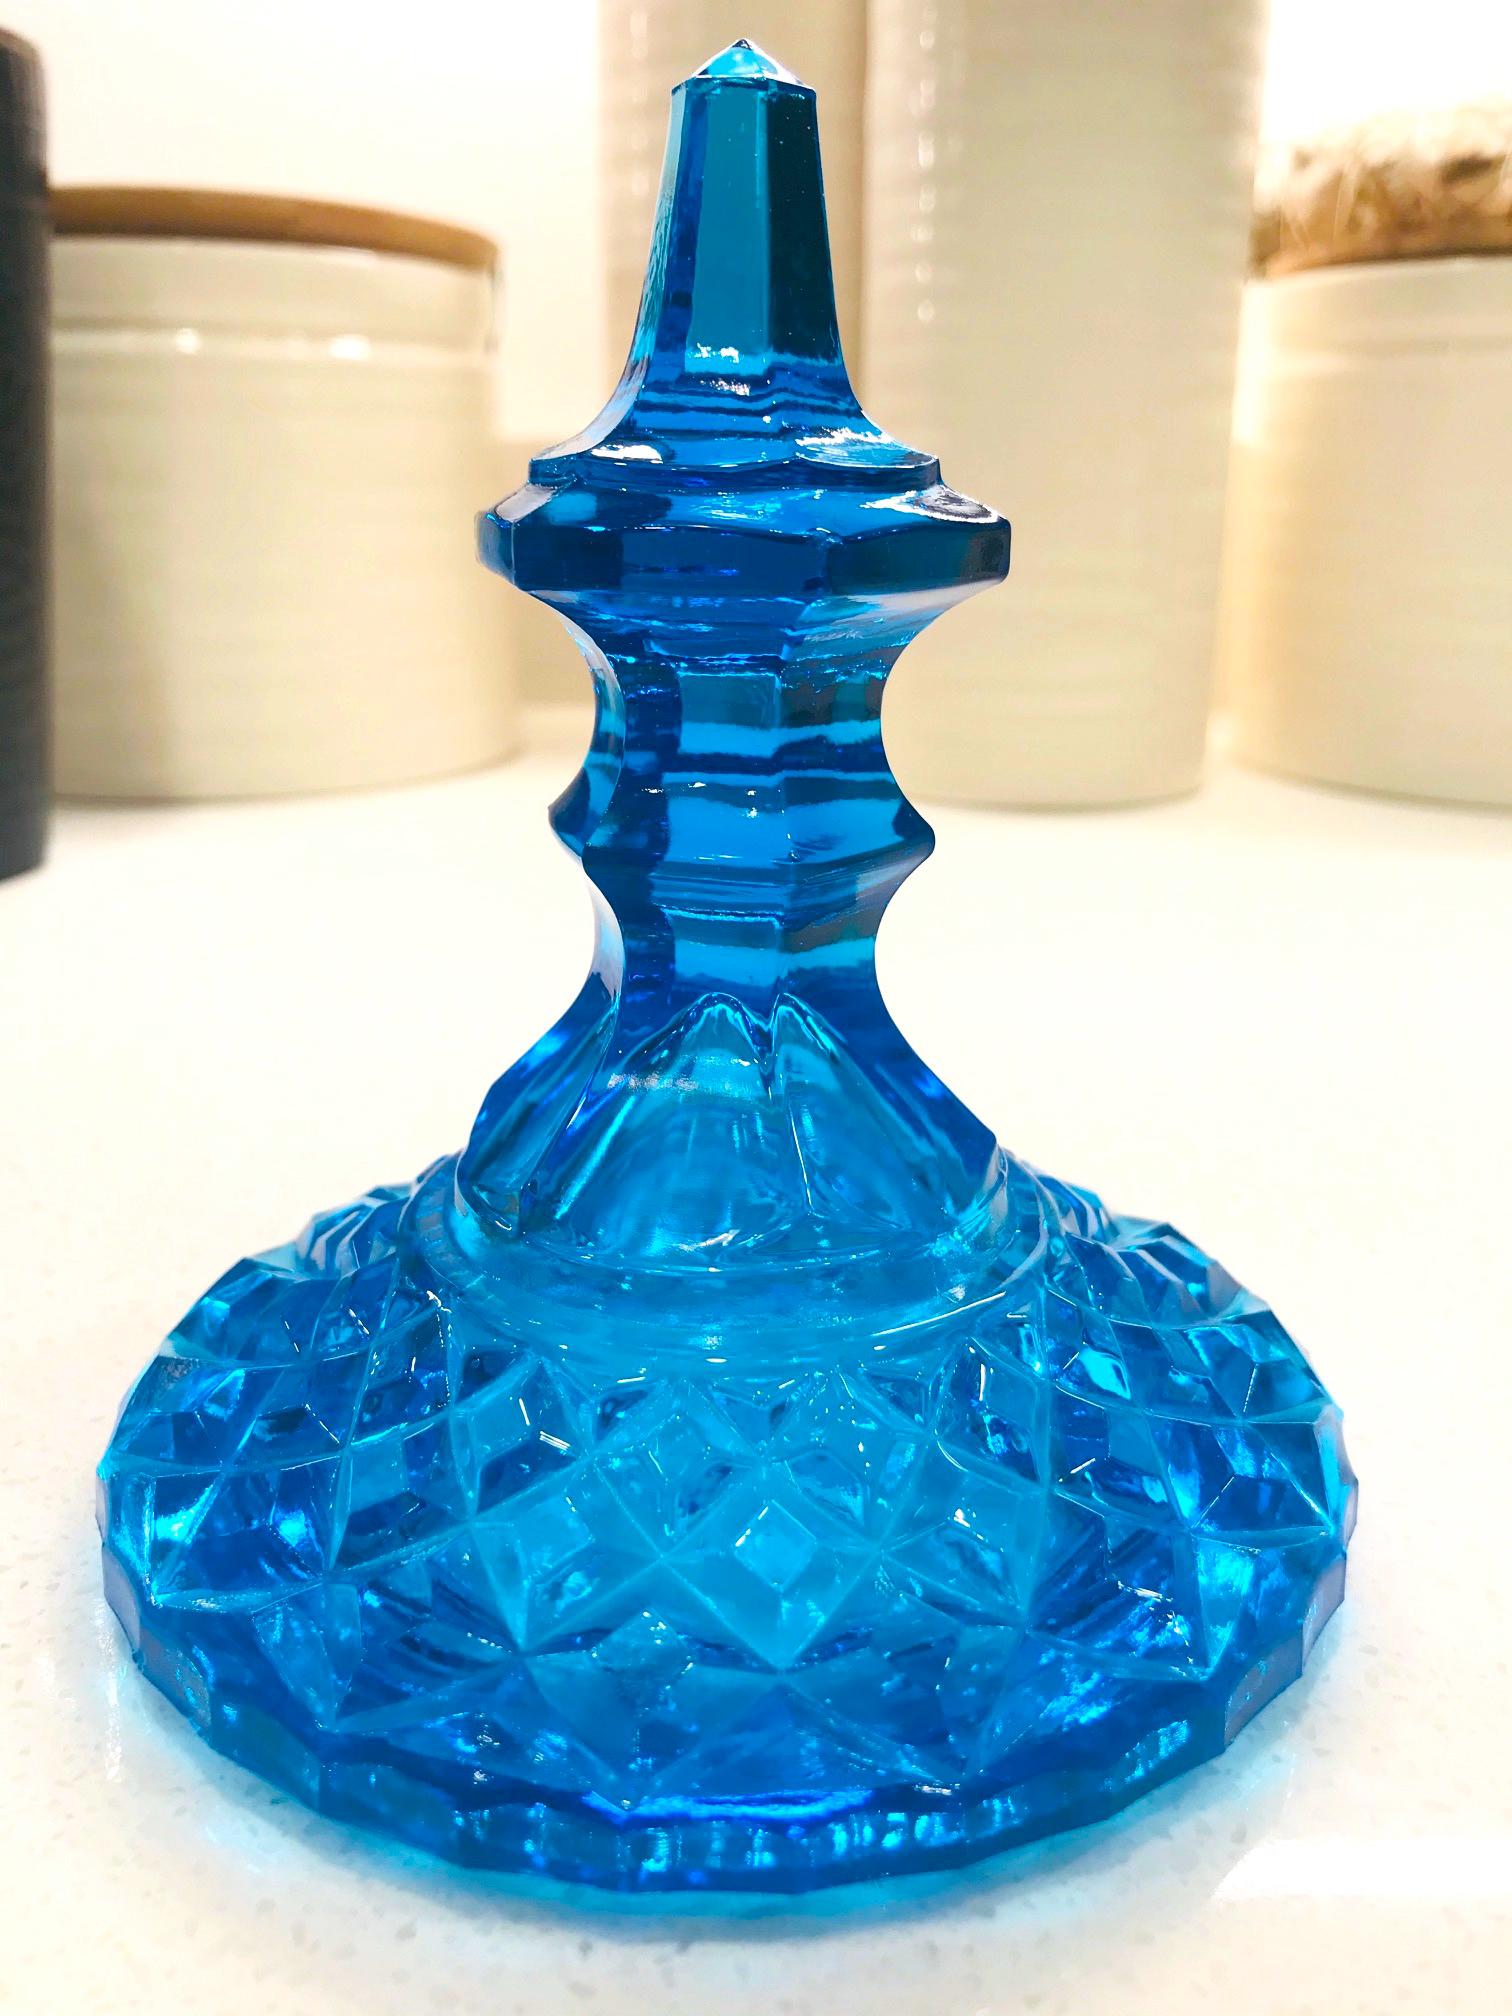 Hollywood Regency Footed Glass Urn with Lid in Vibrant Aqua, 1940s 3